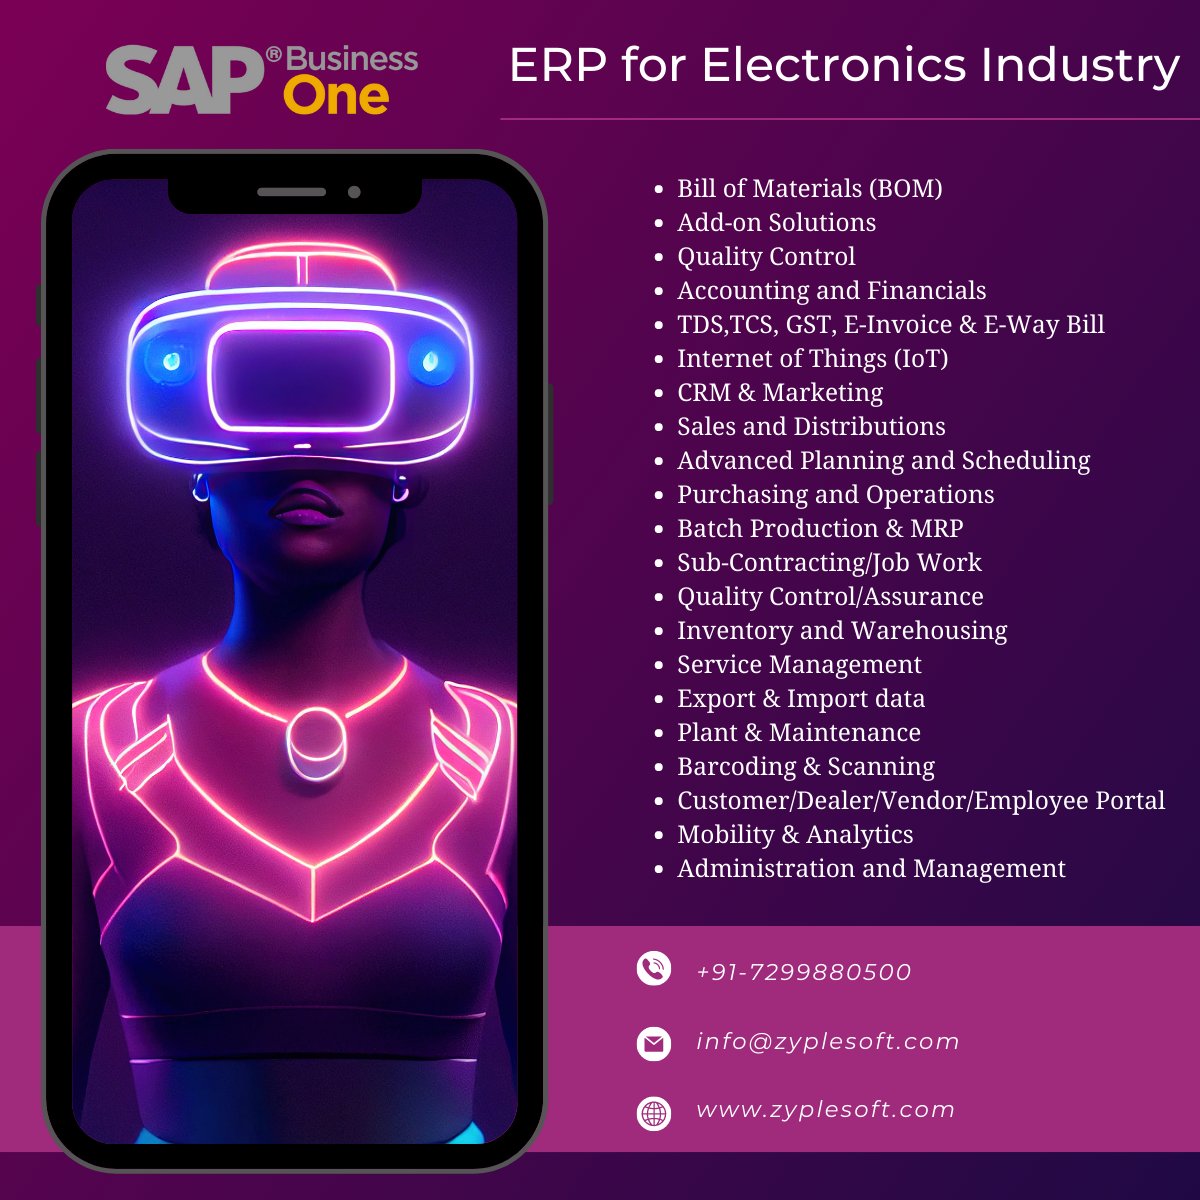 SAP Business One ERP for Electronic Industry with specific features and functionalities. 
#electronics #electronicsindustry #sap #sapbusinessone #electronicsmanufacturing #electrical #industry #businessautomation #business #electrical #electronicscomponents #electroniccompanies